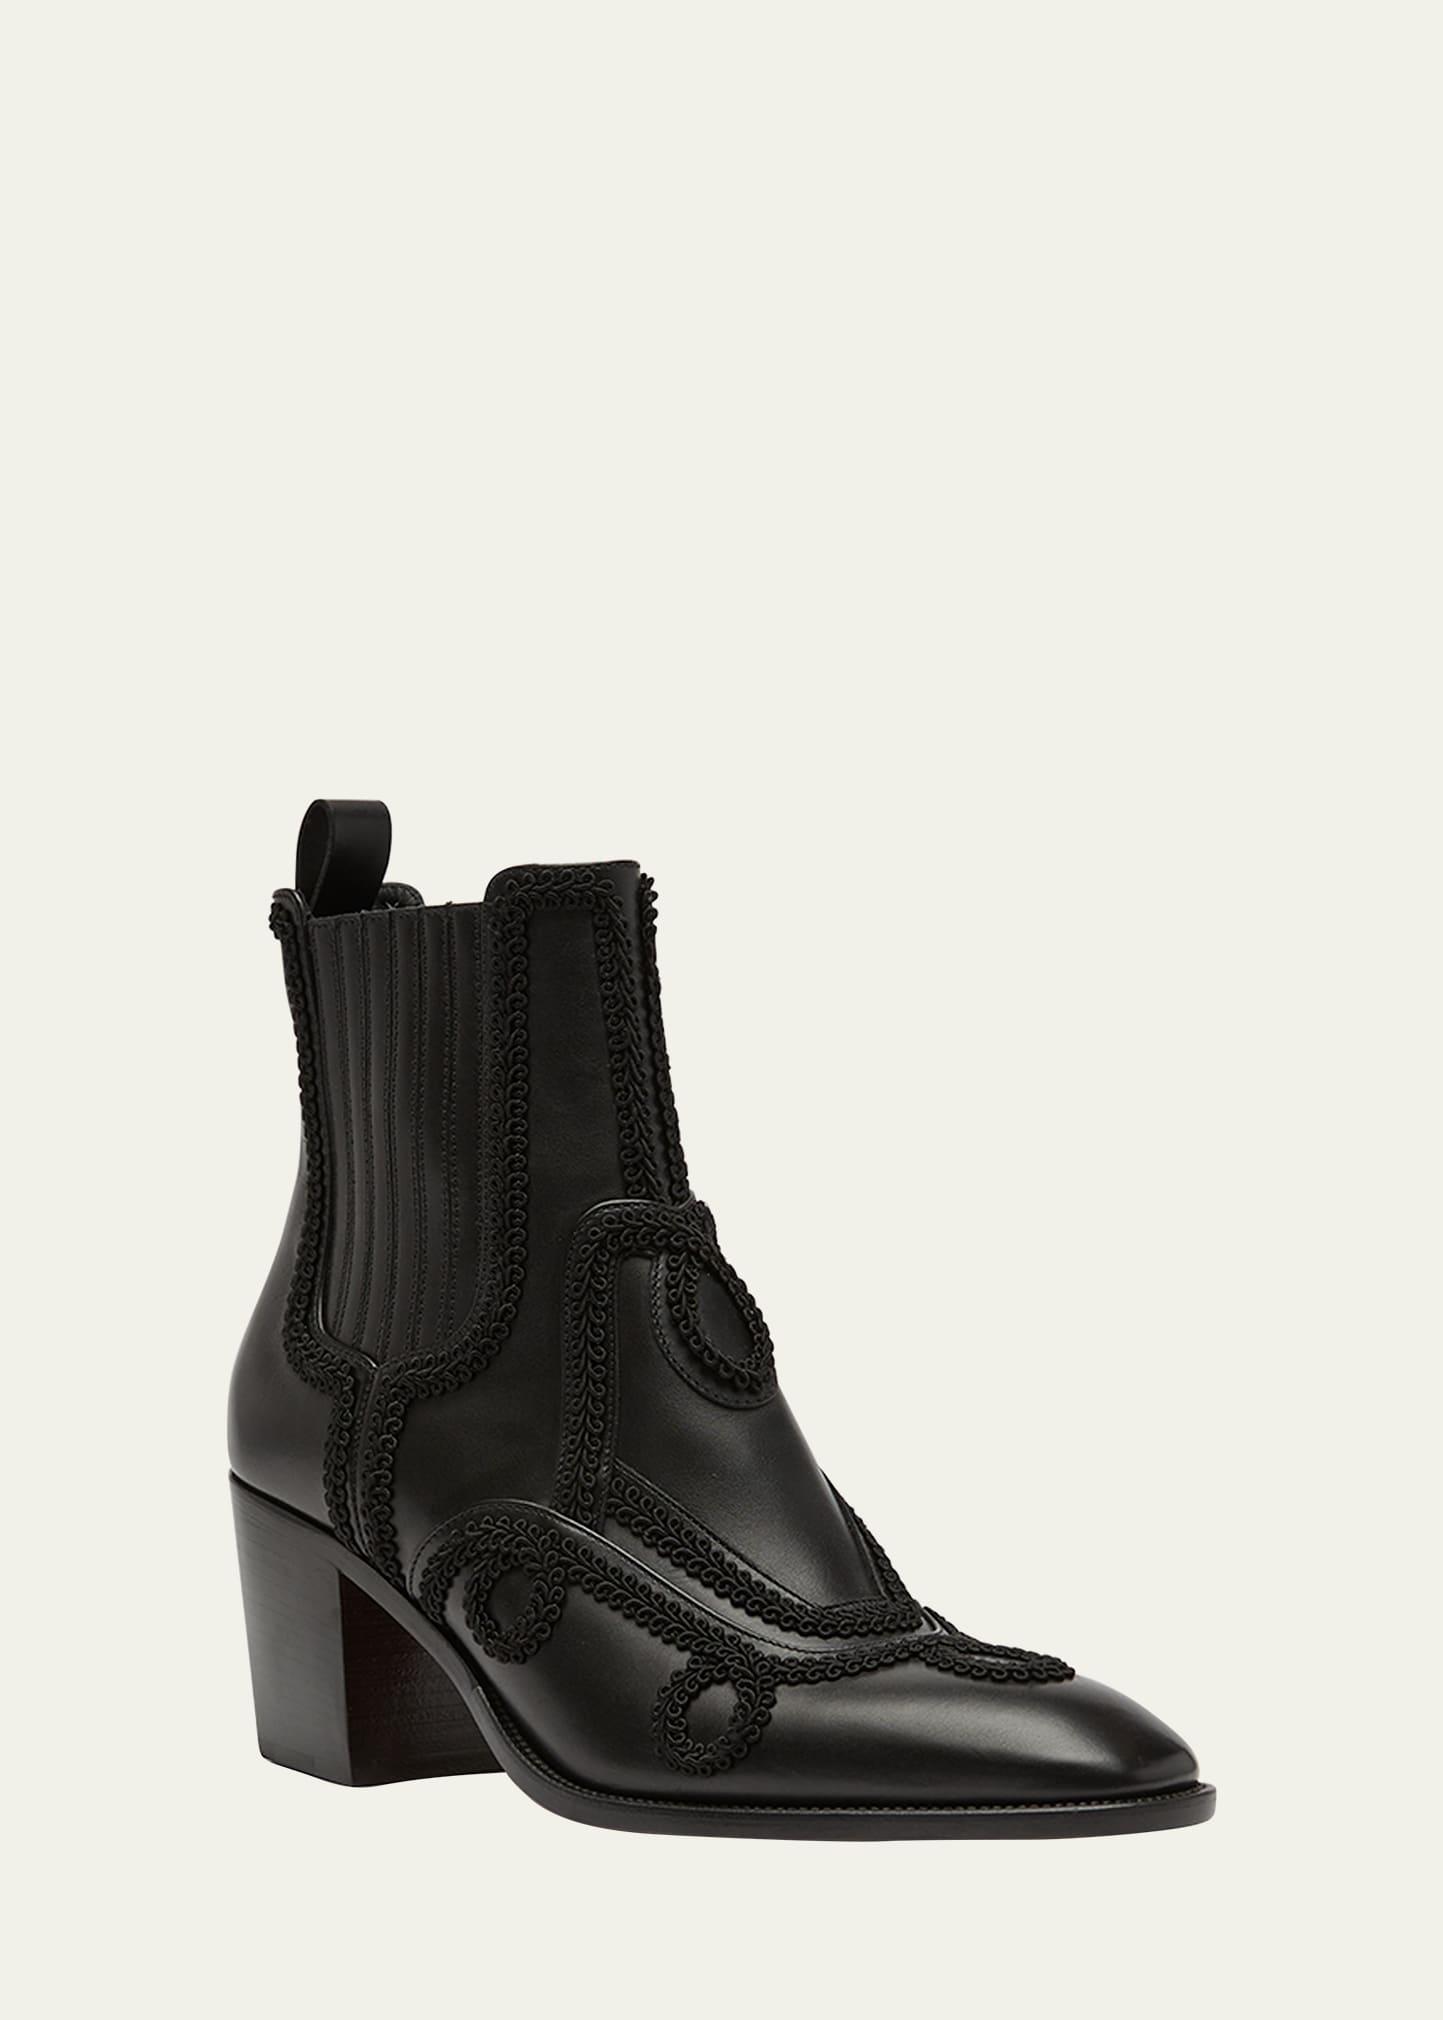 Christian Louboutin Rosalio 70 Red-sole Chelsea Boots in Black for